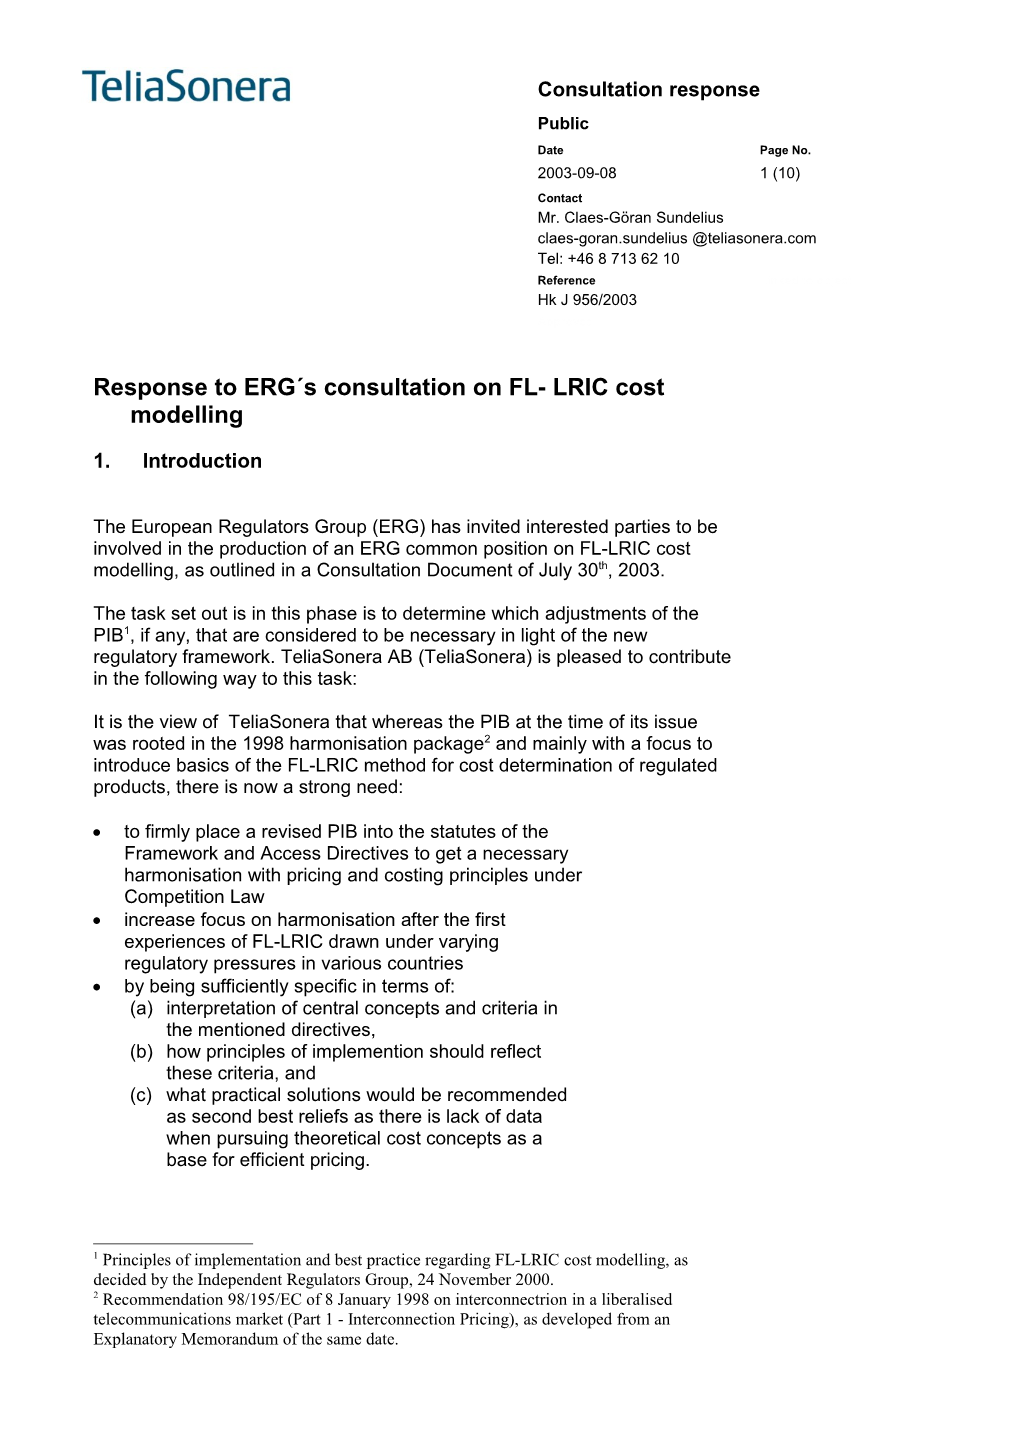 Response to ERG S Consultation on FL- LRIC Cost Modelling